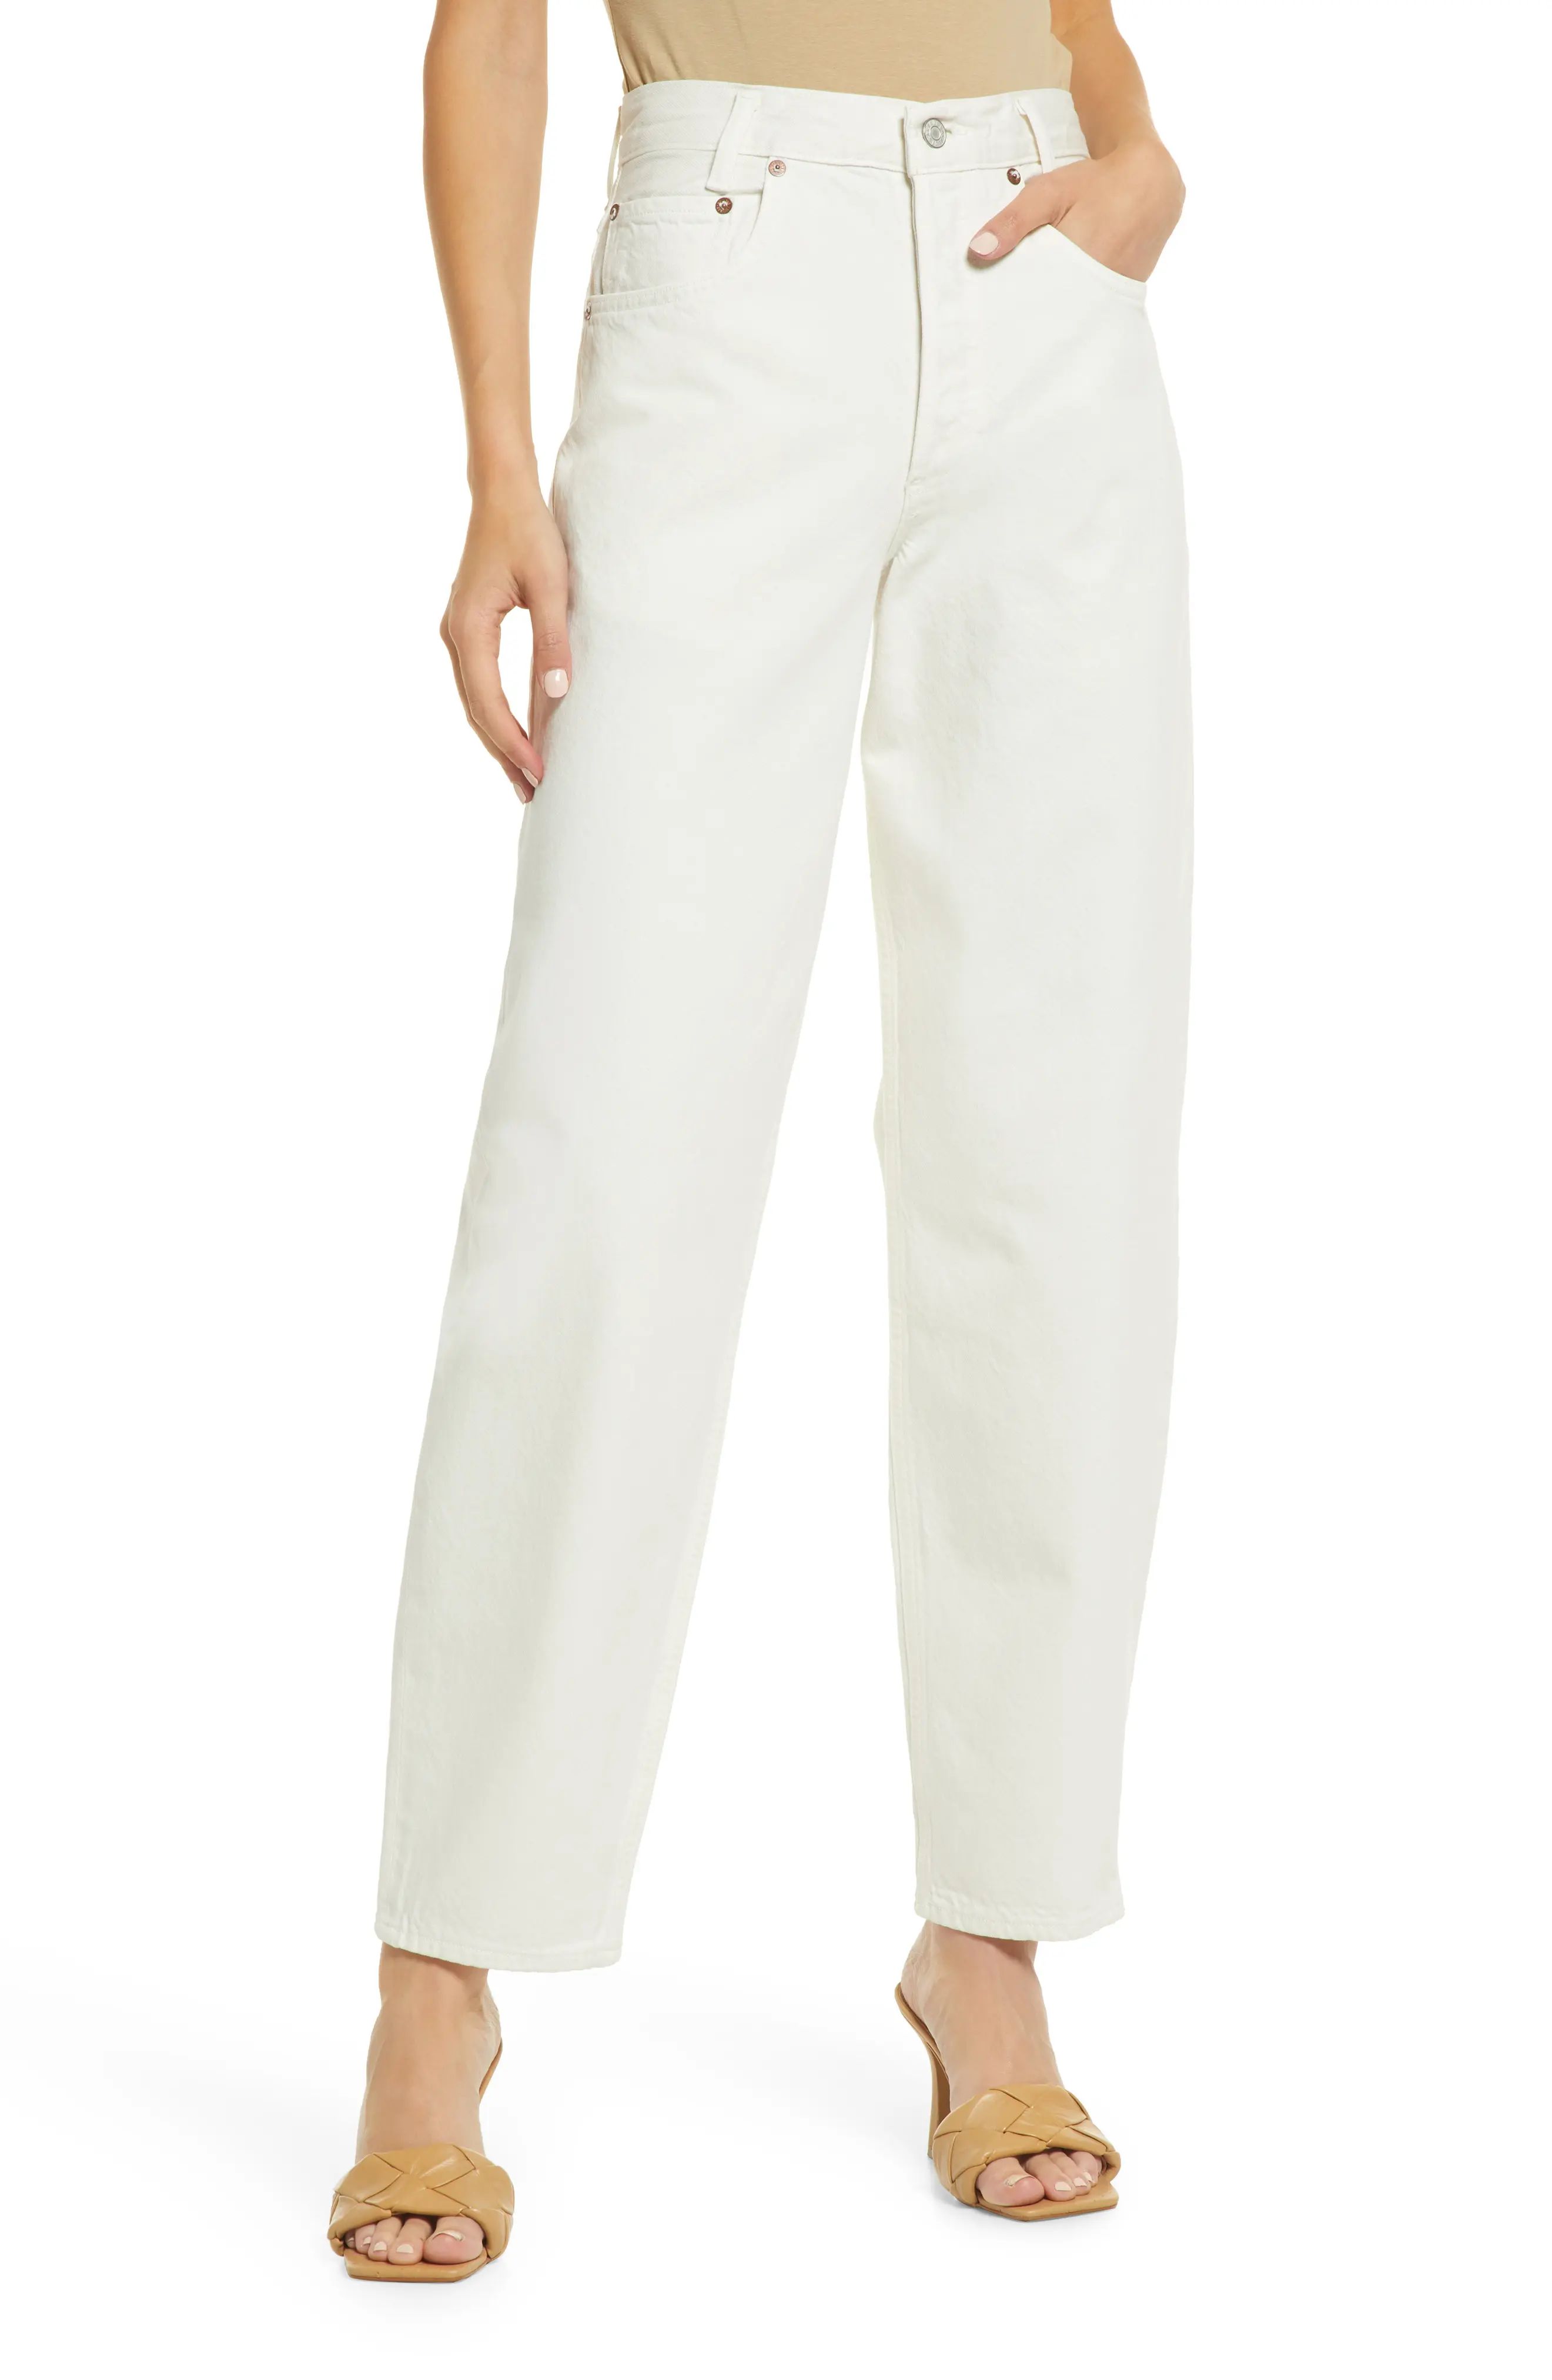 AGOLDE Tapered Baggy Straight Leg Jeans in Drum at Nordstrom, Size 30 | Nordstrom